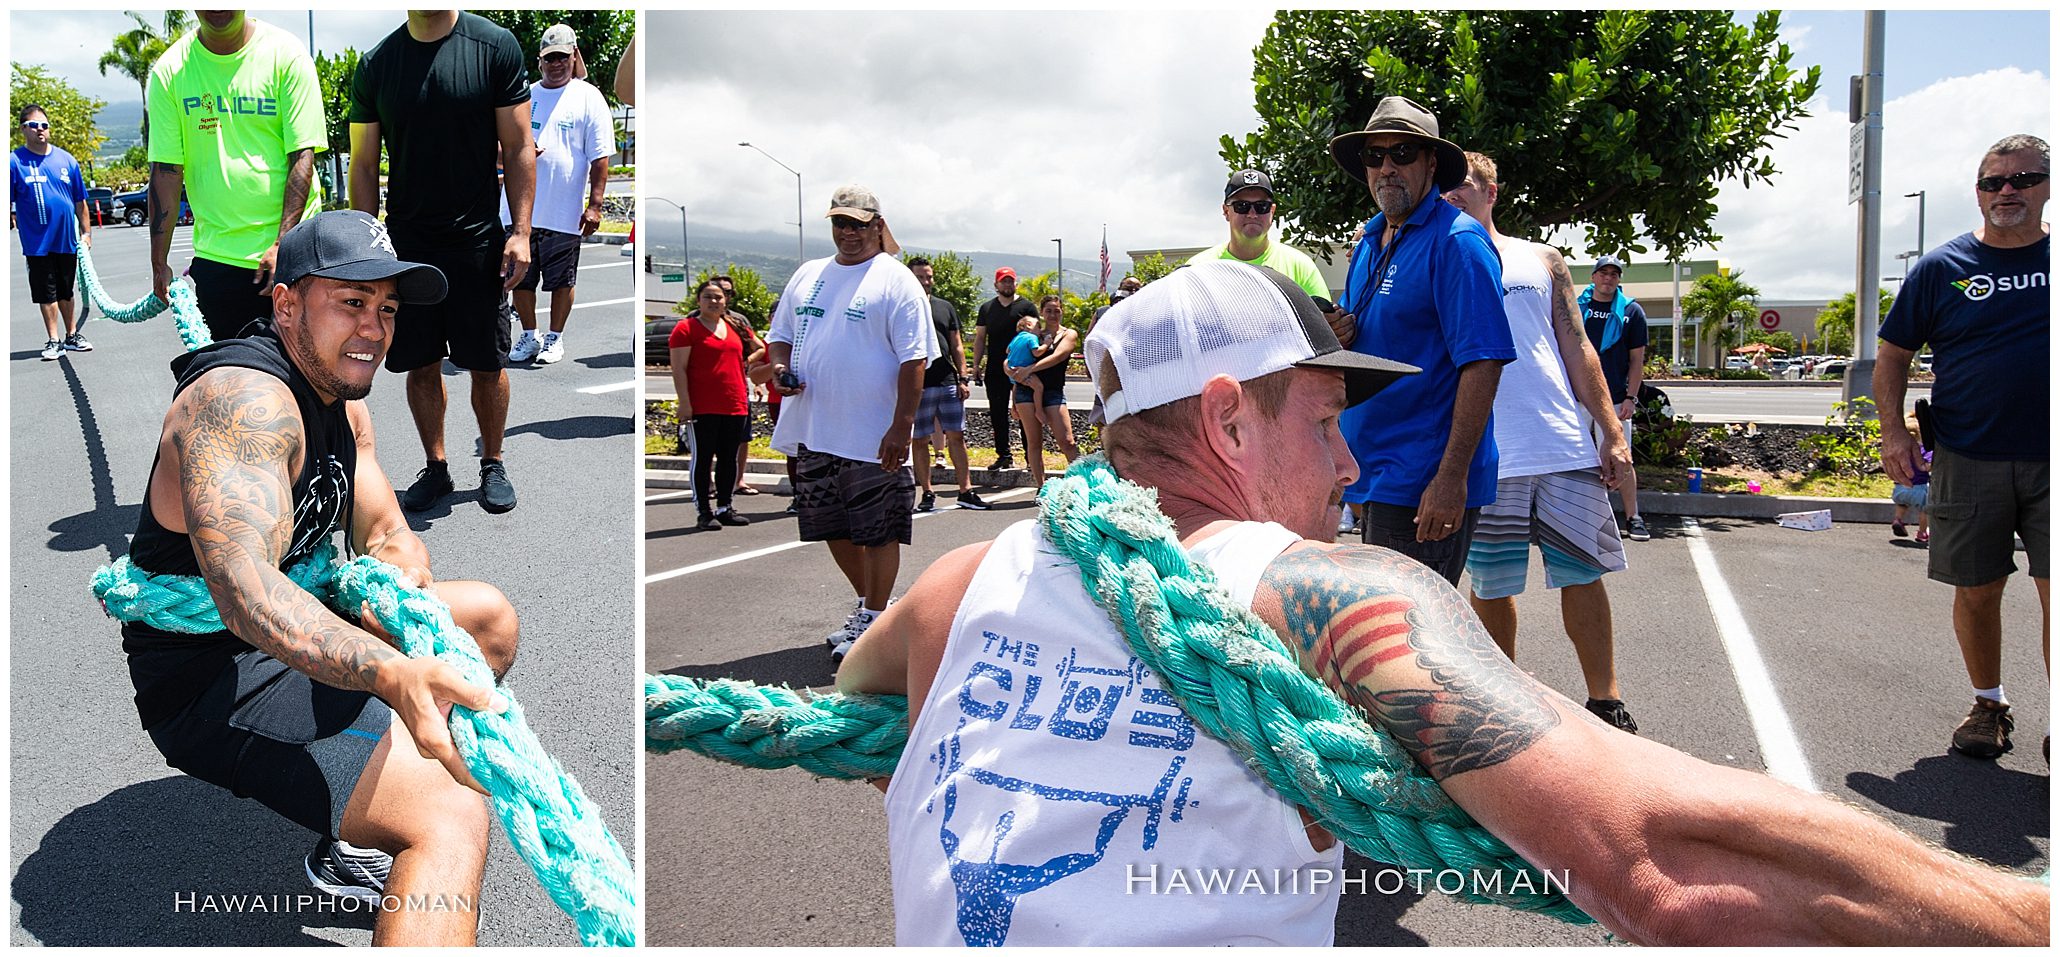 special olympics west hawaii bus a move,